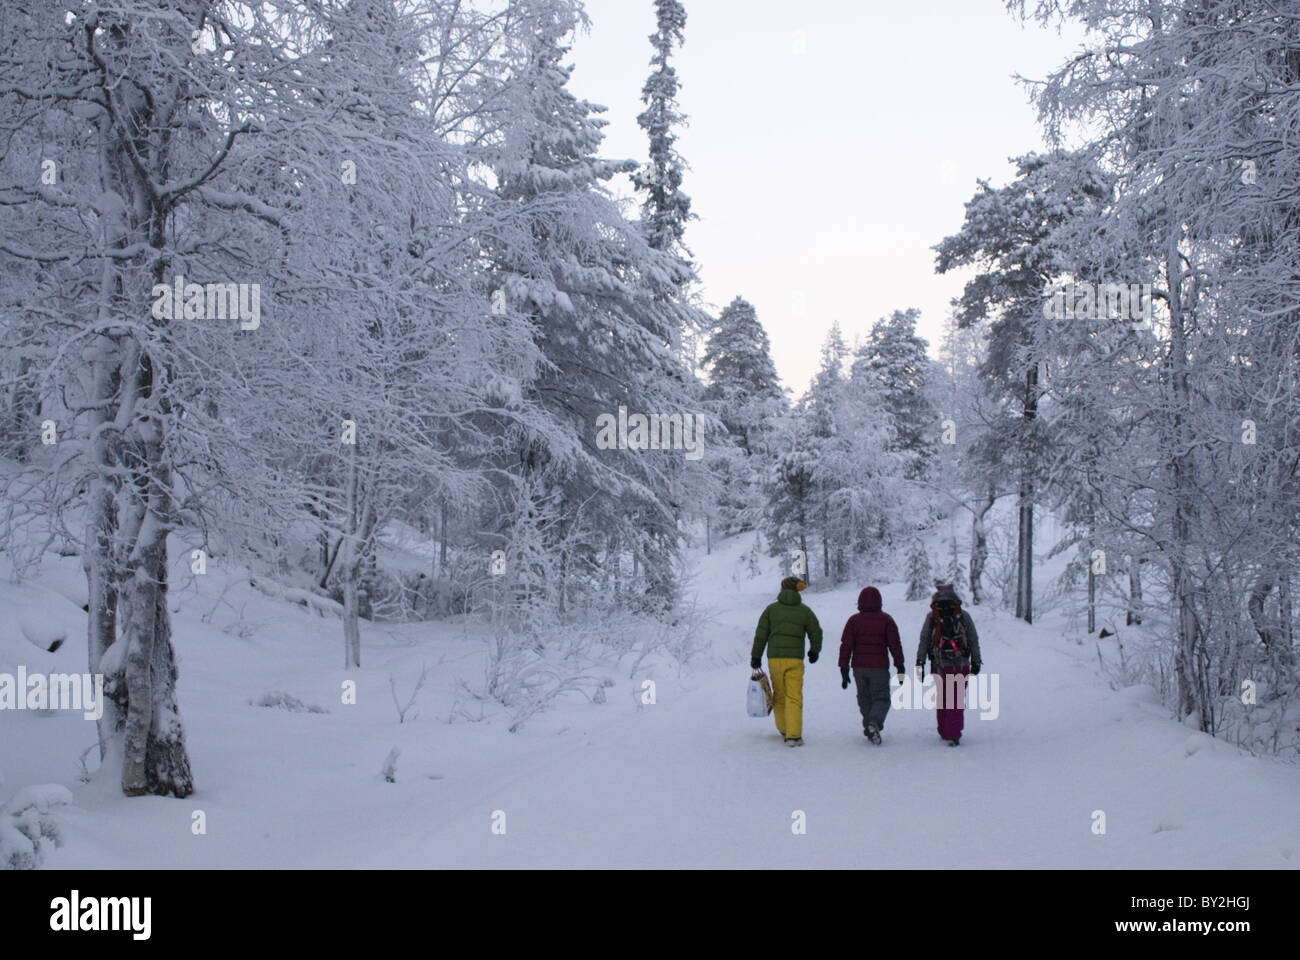 A group of colorfully dressed young adults walking among snow-clad trees at Pyhätunturi, Finnish Lapland. Stock Photo